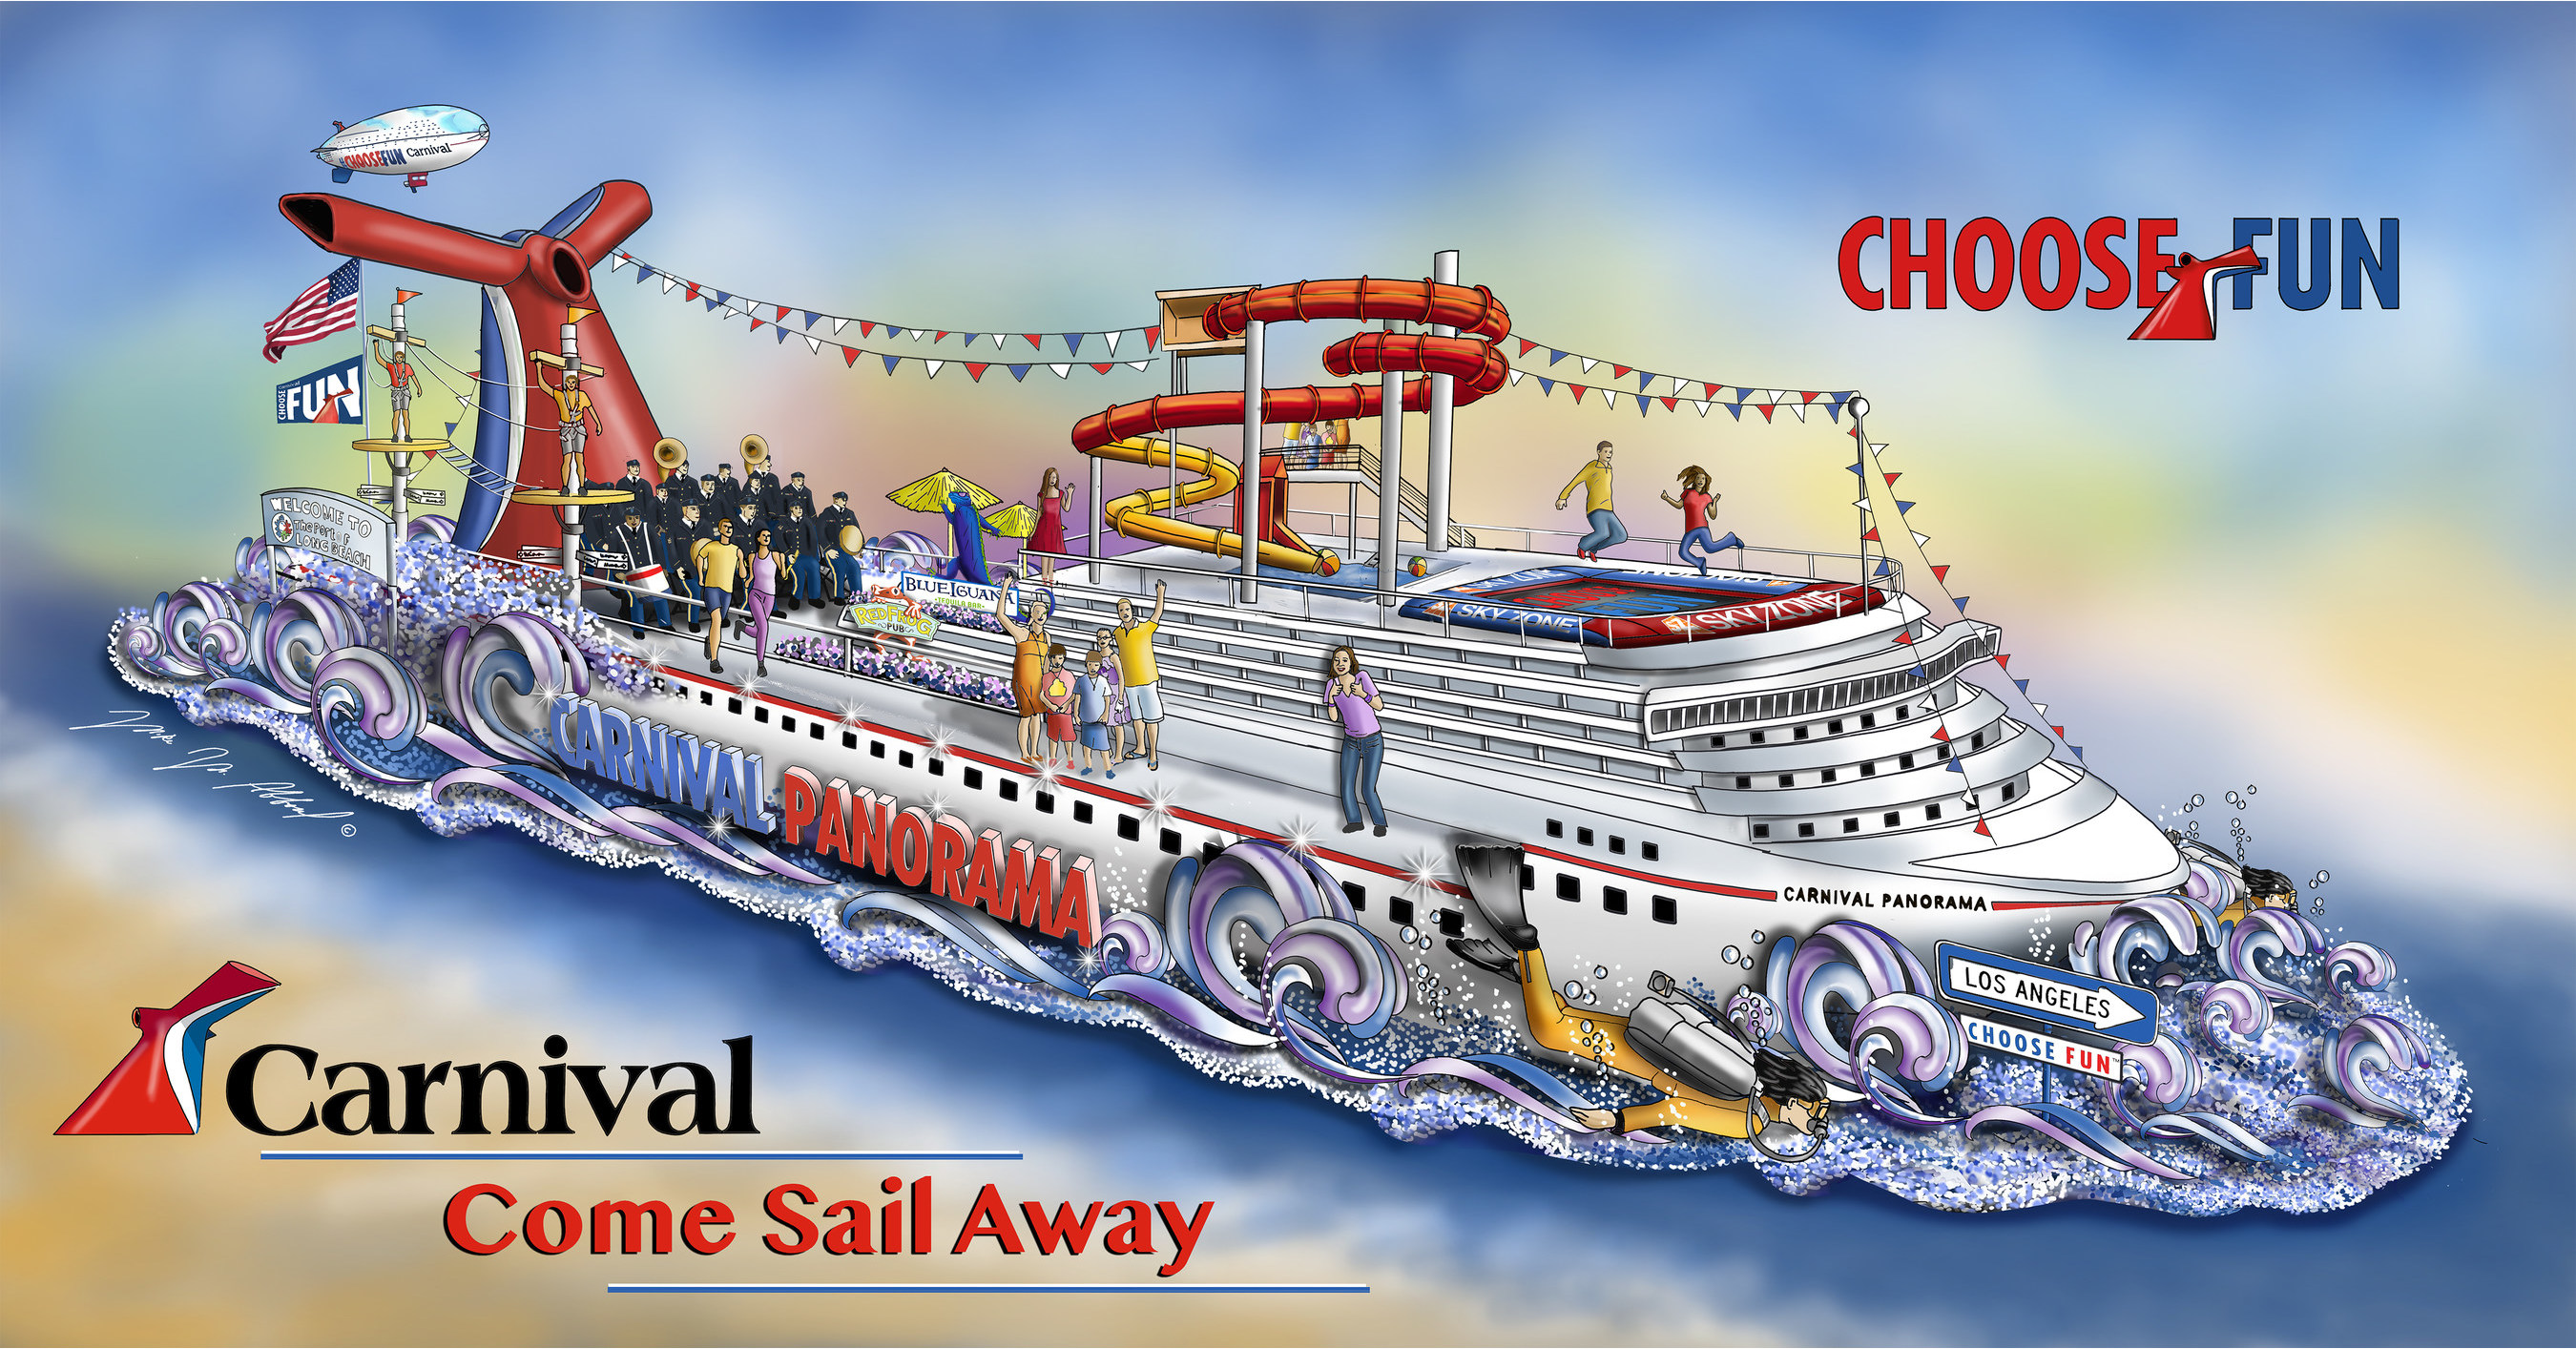 Carnival Cruise Line to Kick Off YearLong Celebration of Arrival of